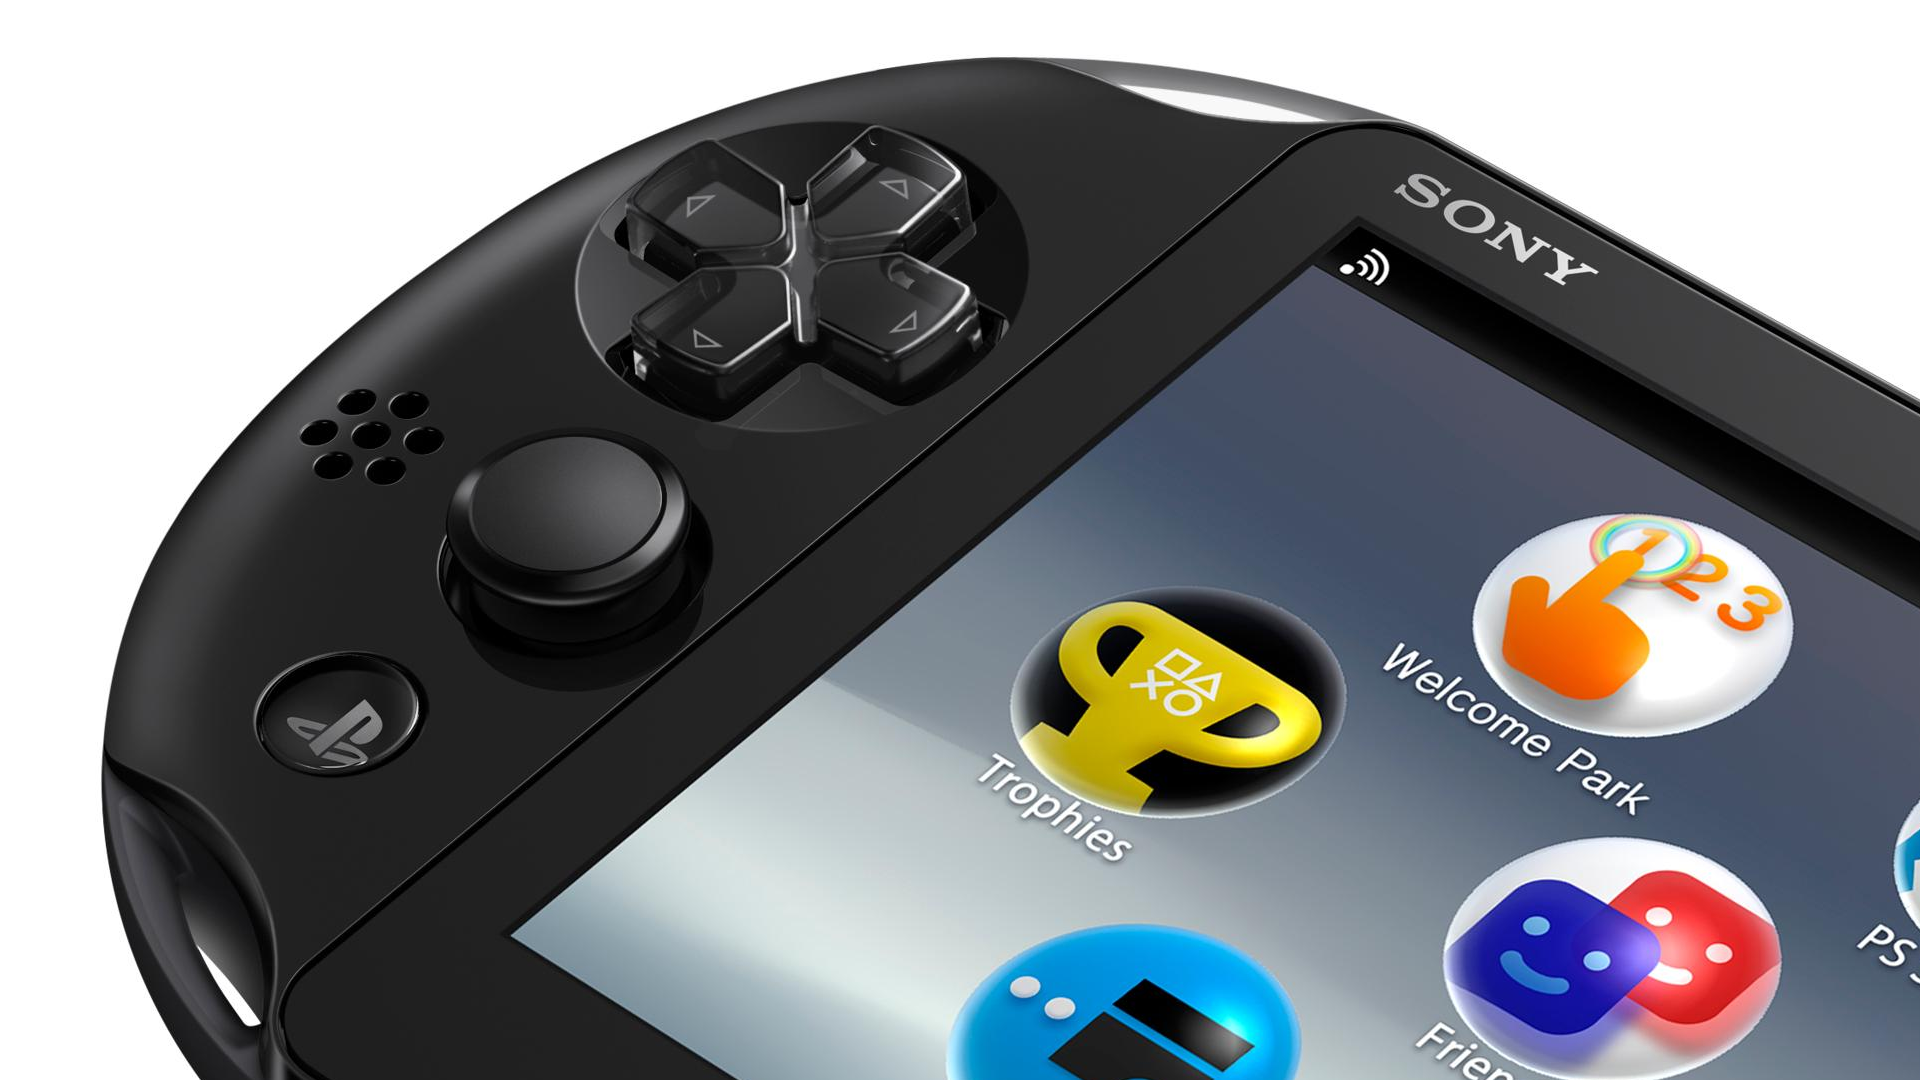 Why PS Vita blazed a trail for handheld gaming and is worth buying in 2020